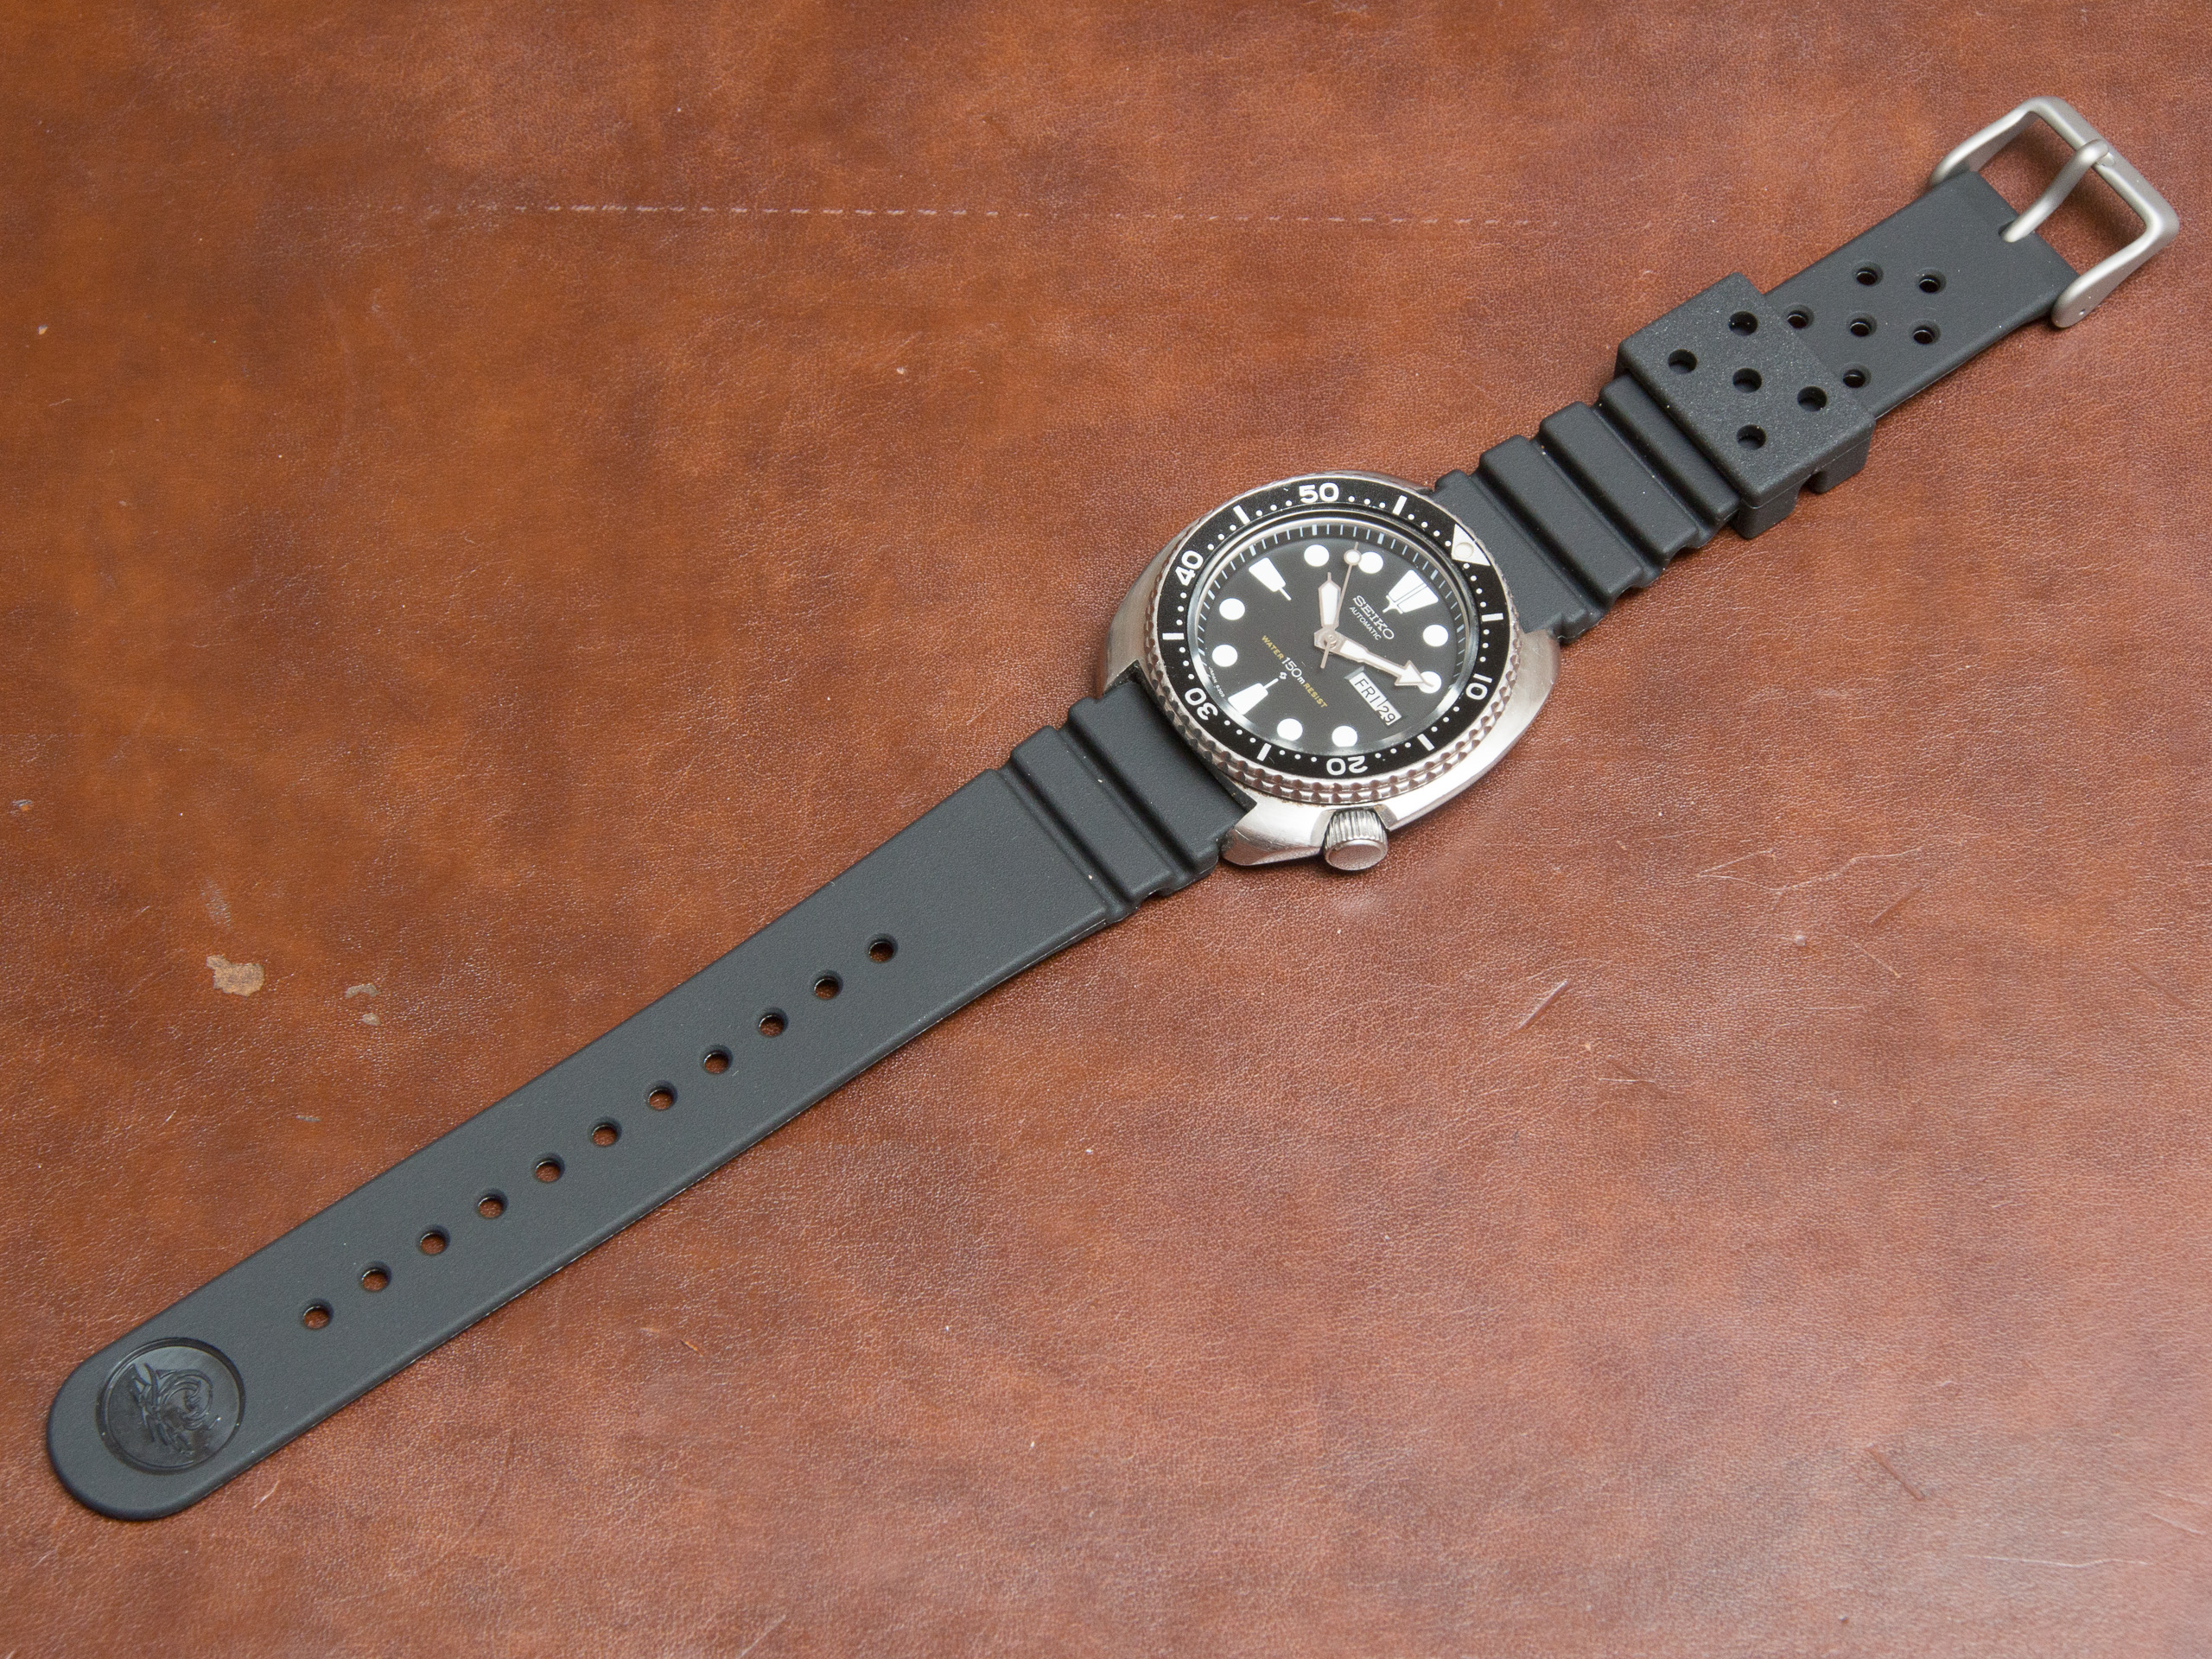 Strap options: GL831 vs DAL1BP | The Watch Site